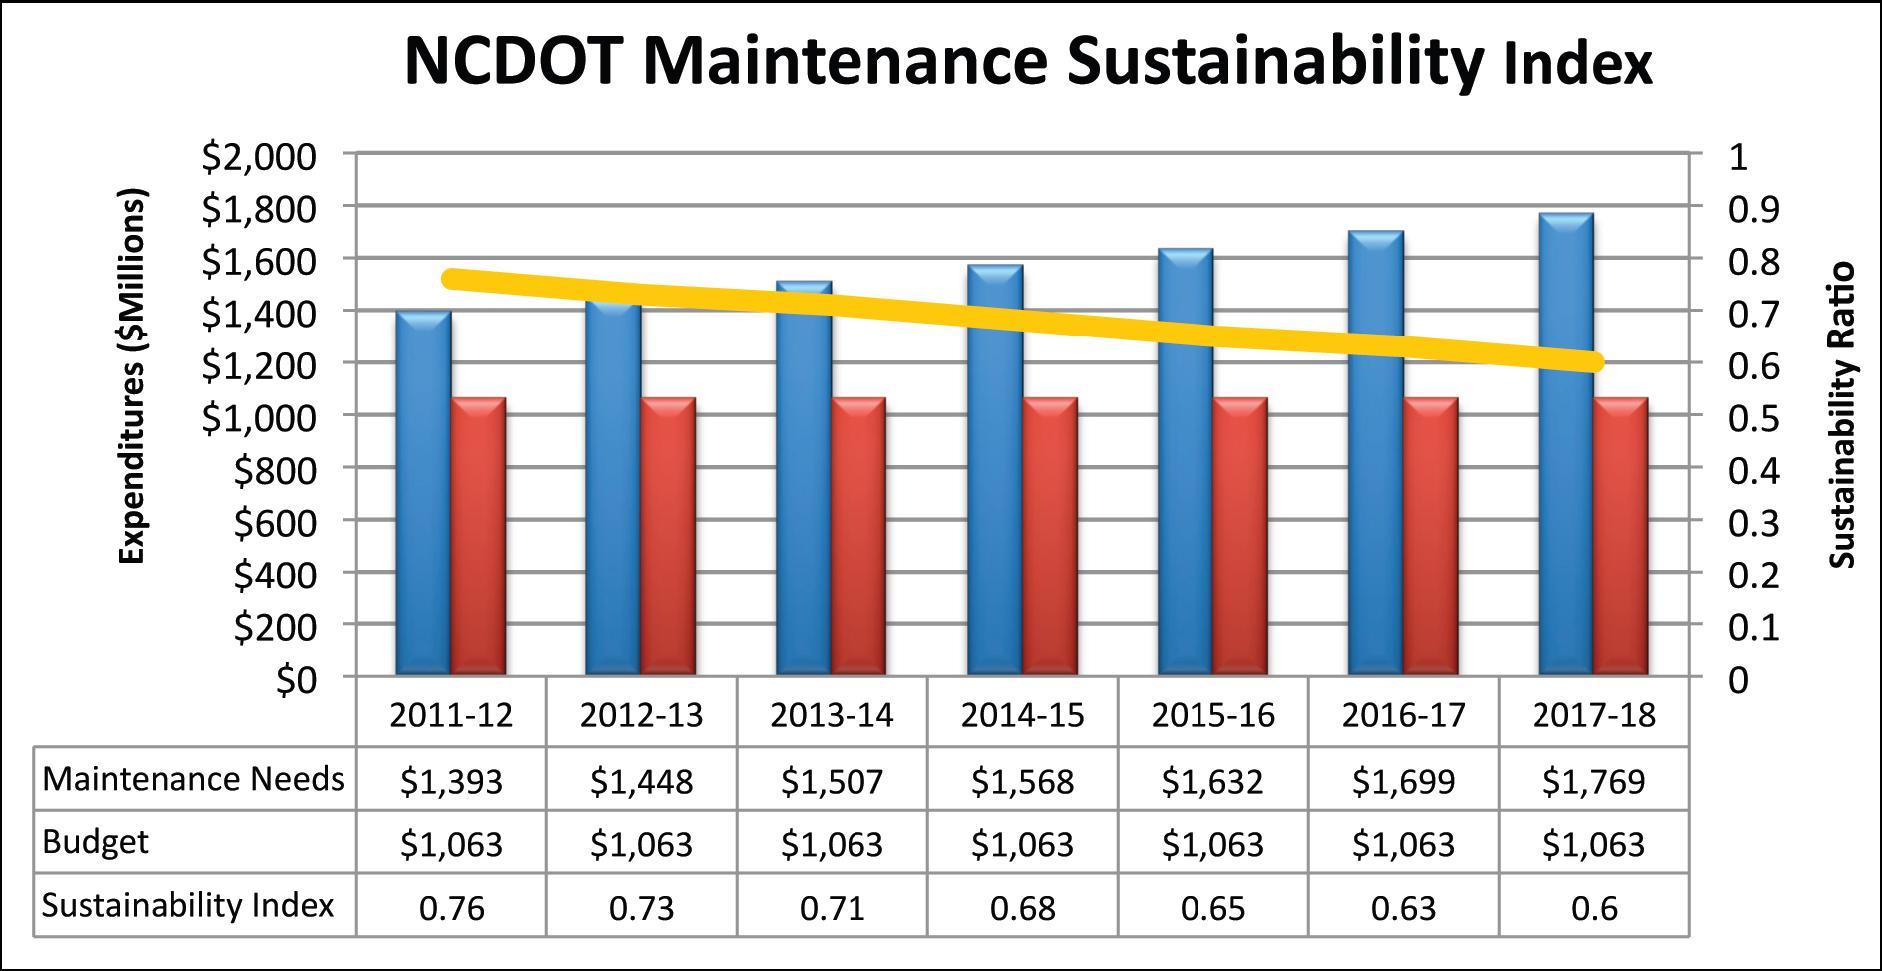 Figure 67 is a complex chart that illustrates the needed maintenance expenditures, compared to the actual expenditures, for each fiscal year starting with 2011-2012 and continuing through 2017 to 2018. For 2011-2012, the needed expenditure is one billion three hundred and ninety two million dollars while the actual expenditure will be one billion and 62 million dollars. That produces for that year a sustainability index of point 76. In 2012-2013 the maintenance need is one billion four hundred and forty-seven million dollars compared to a budget of one billion and sixty two million. That creates a sustainability ratio of  point 73.For each year of the forecast period, the chart illustrates that if expenditures remain current at the one point zero six two billion level, the needed expenditure continues to rise and the gap between needed expenditures and actual expenditures increases.  Shown as a trend line is the asset sustainability ratio which starts in 2011-2012 at point seven six and it steadily declines to point six zero by 2017-2018.